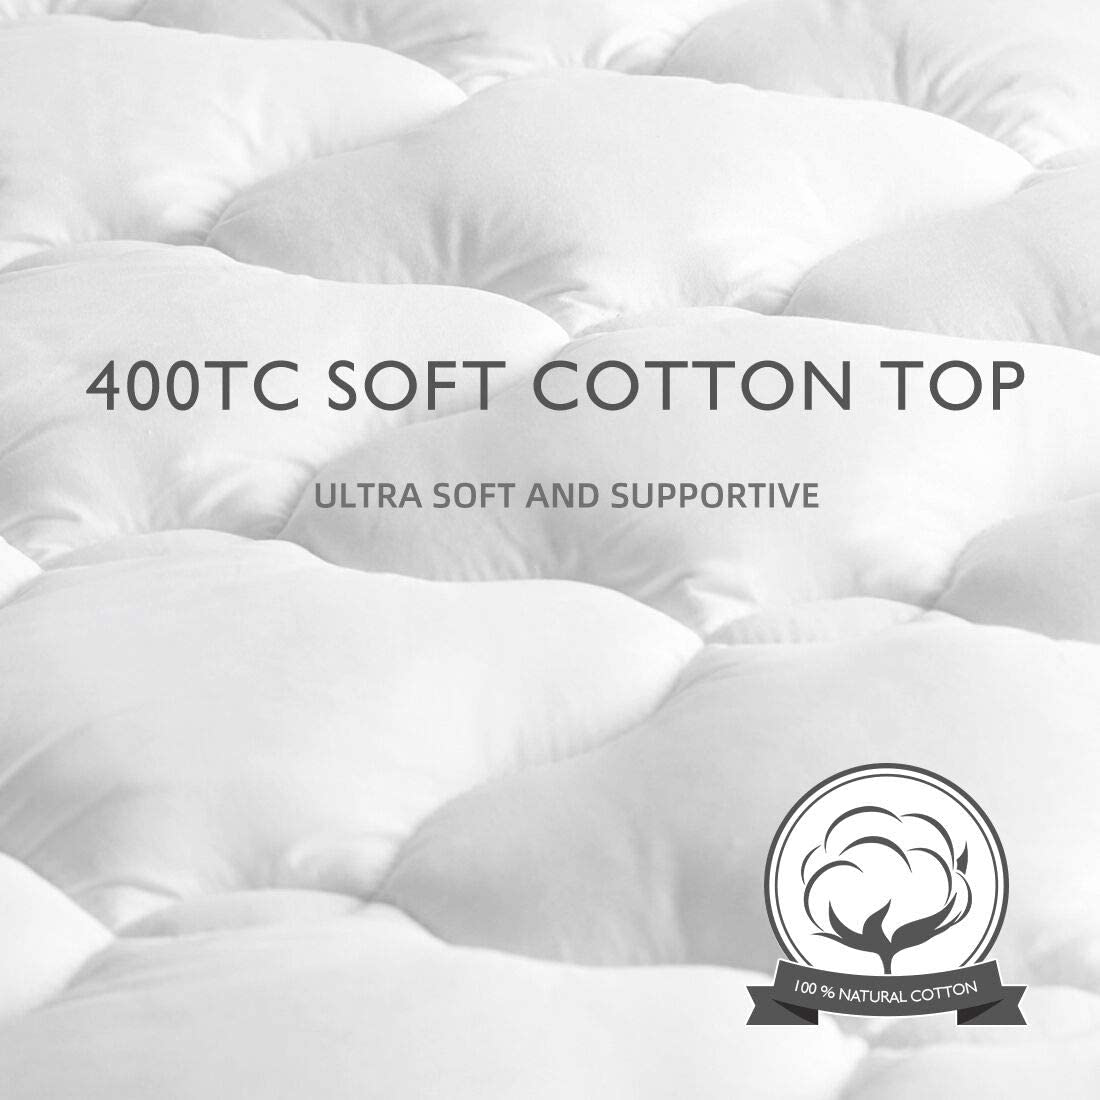 TEXARTIST California King Mattress Pad Cover Cooling Mattress Topper 400 TC Cotton Pillow Top Mattress Cover Quilted Fitted Mattress Protector with 8-21 Inch Deep Pocket